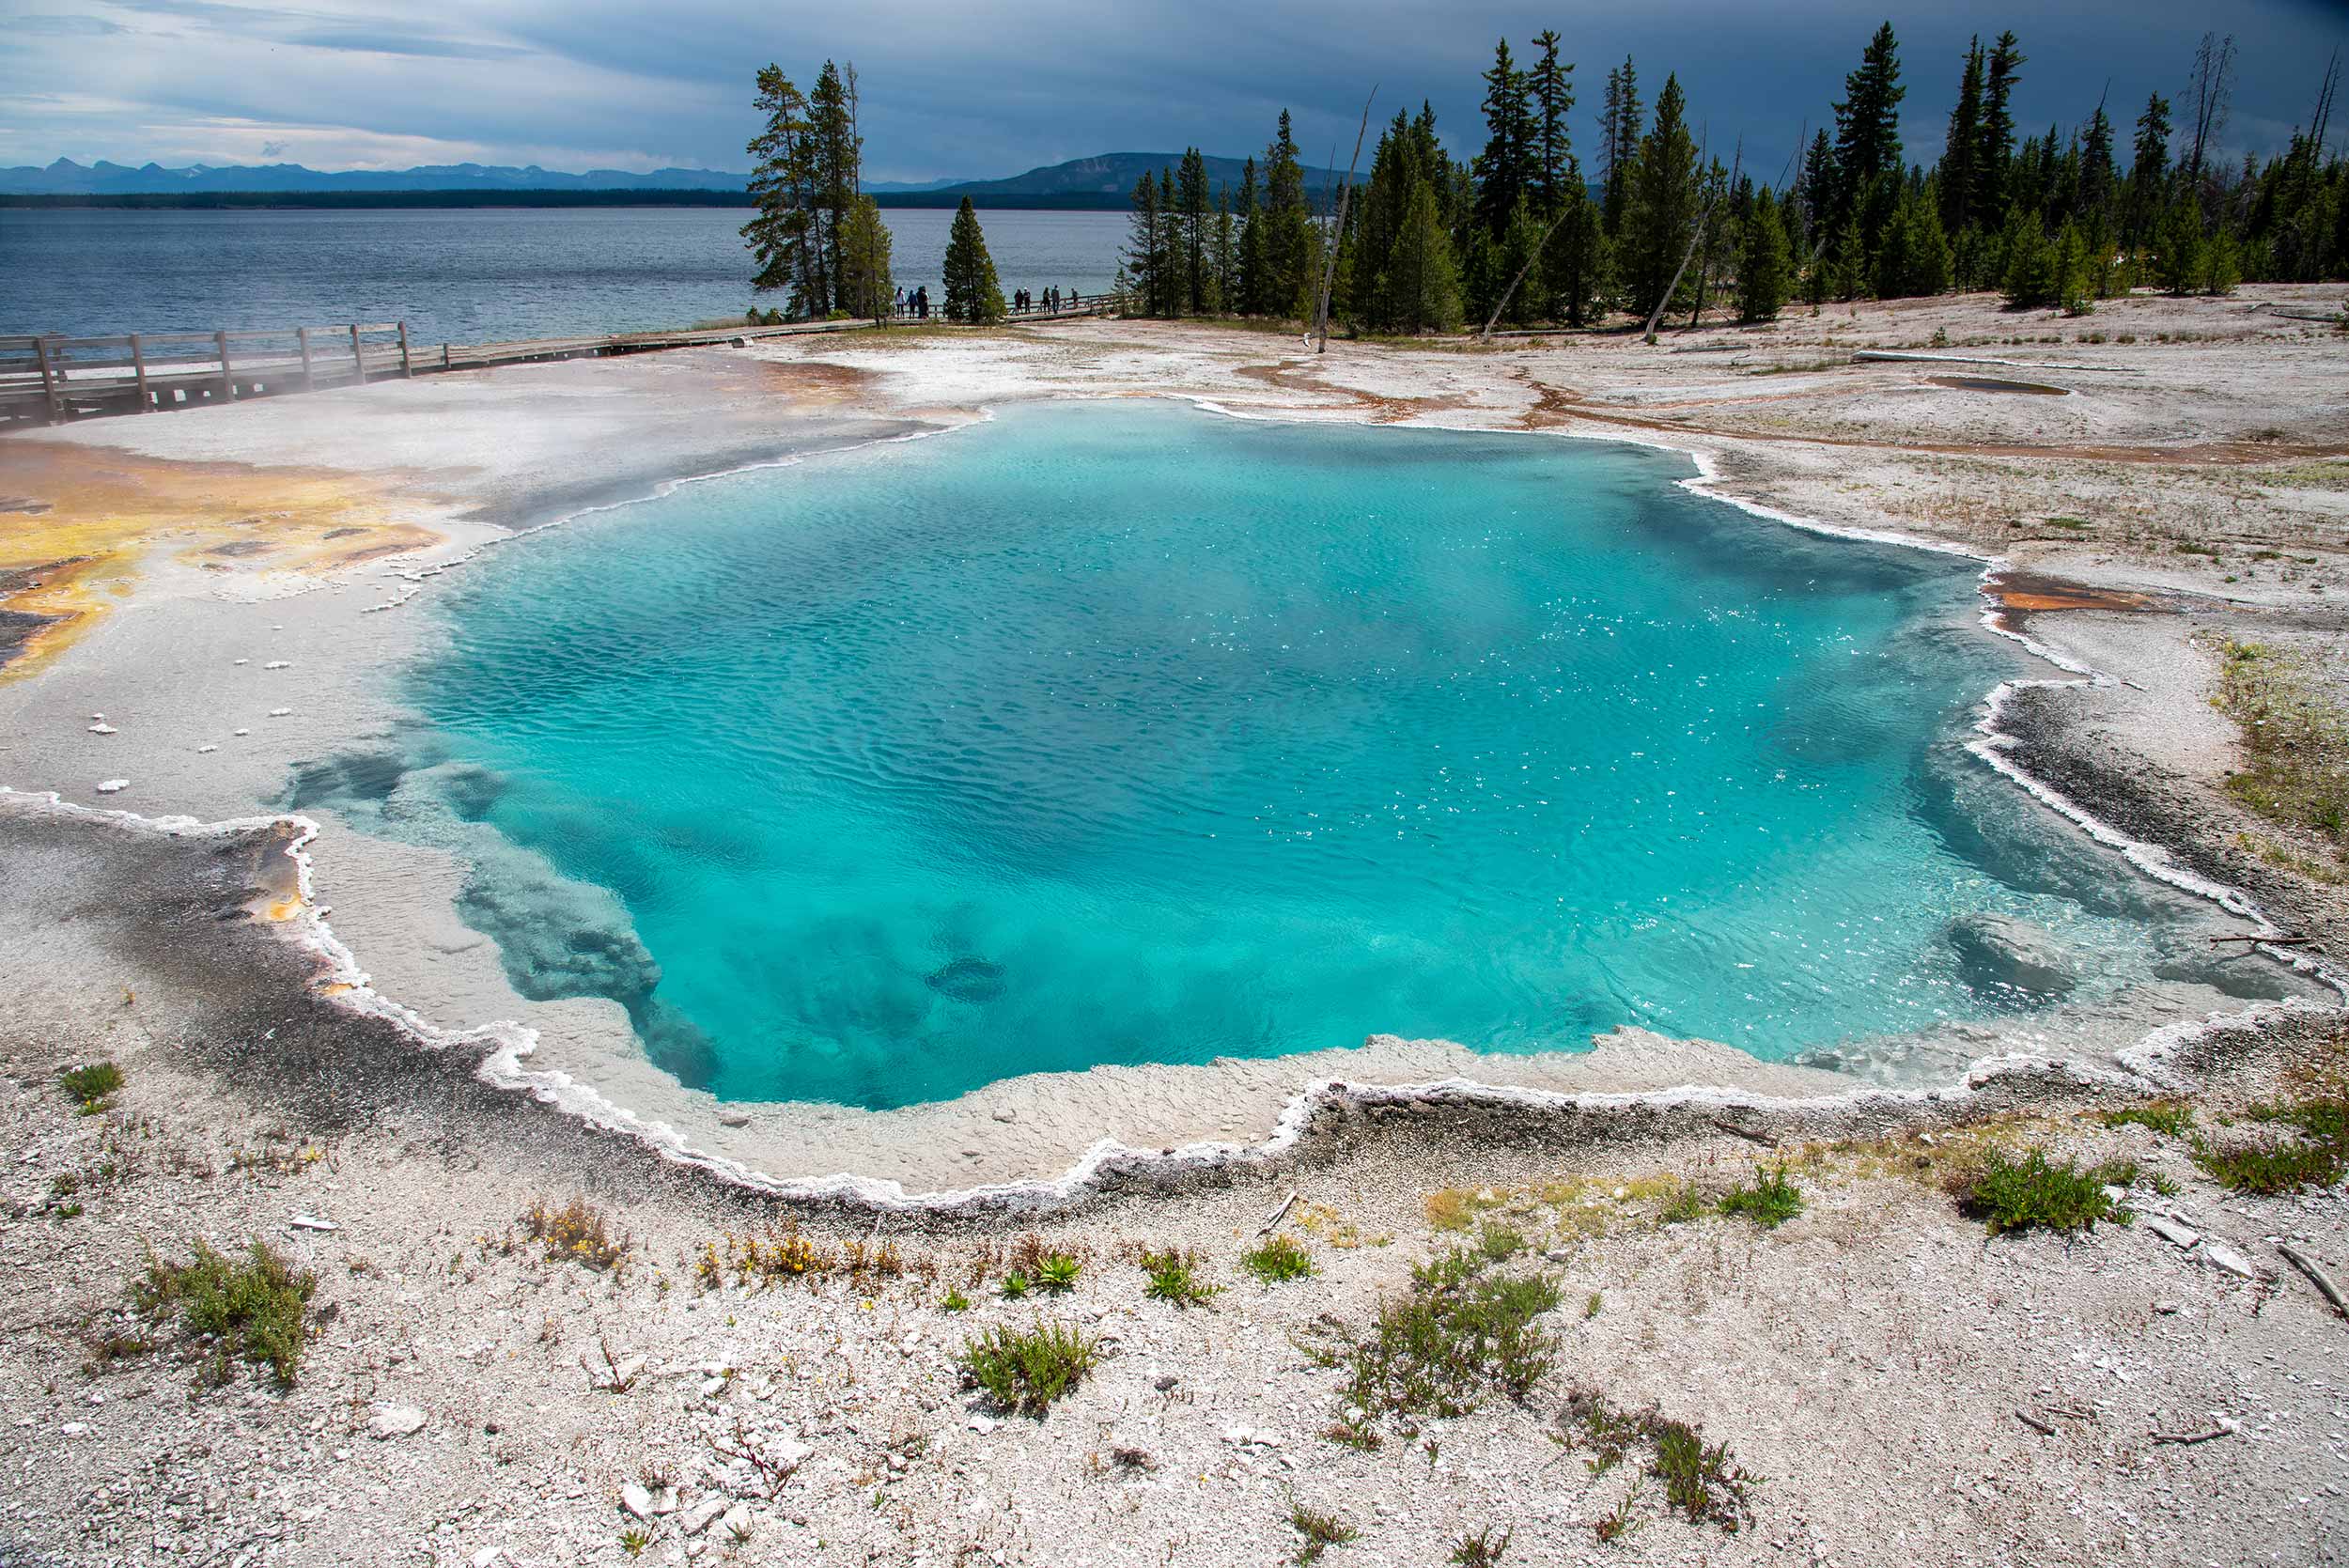 Geothermal feature at west thumb at Yellowstone National Park